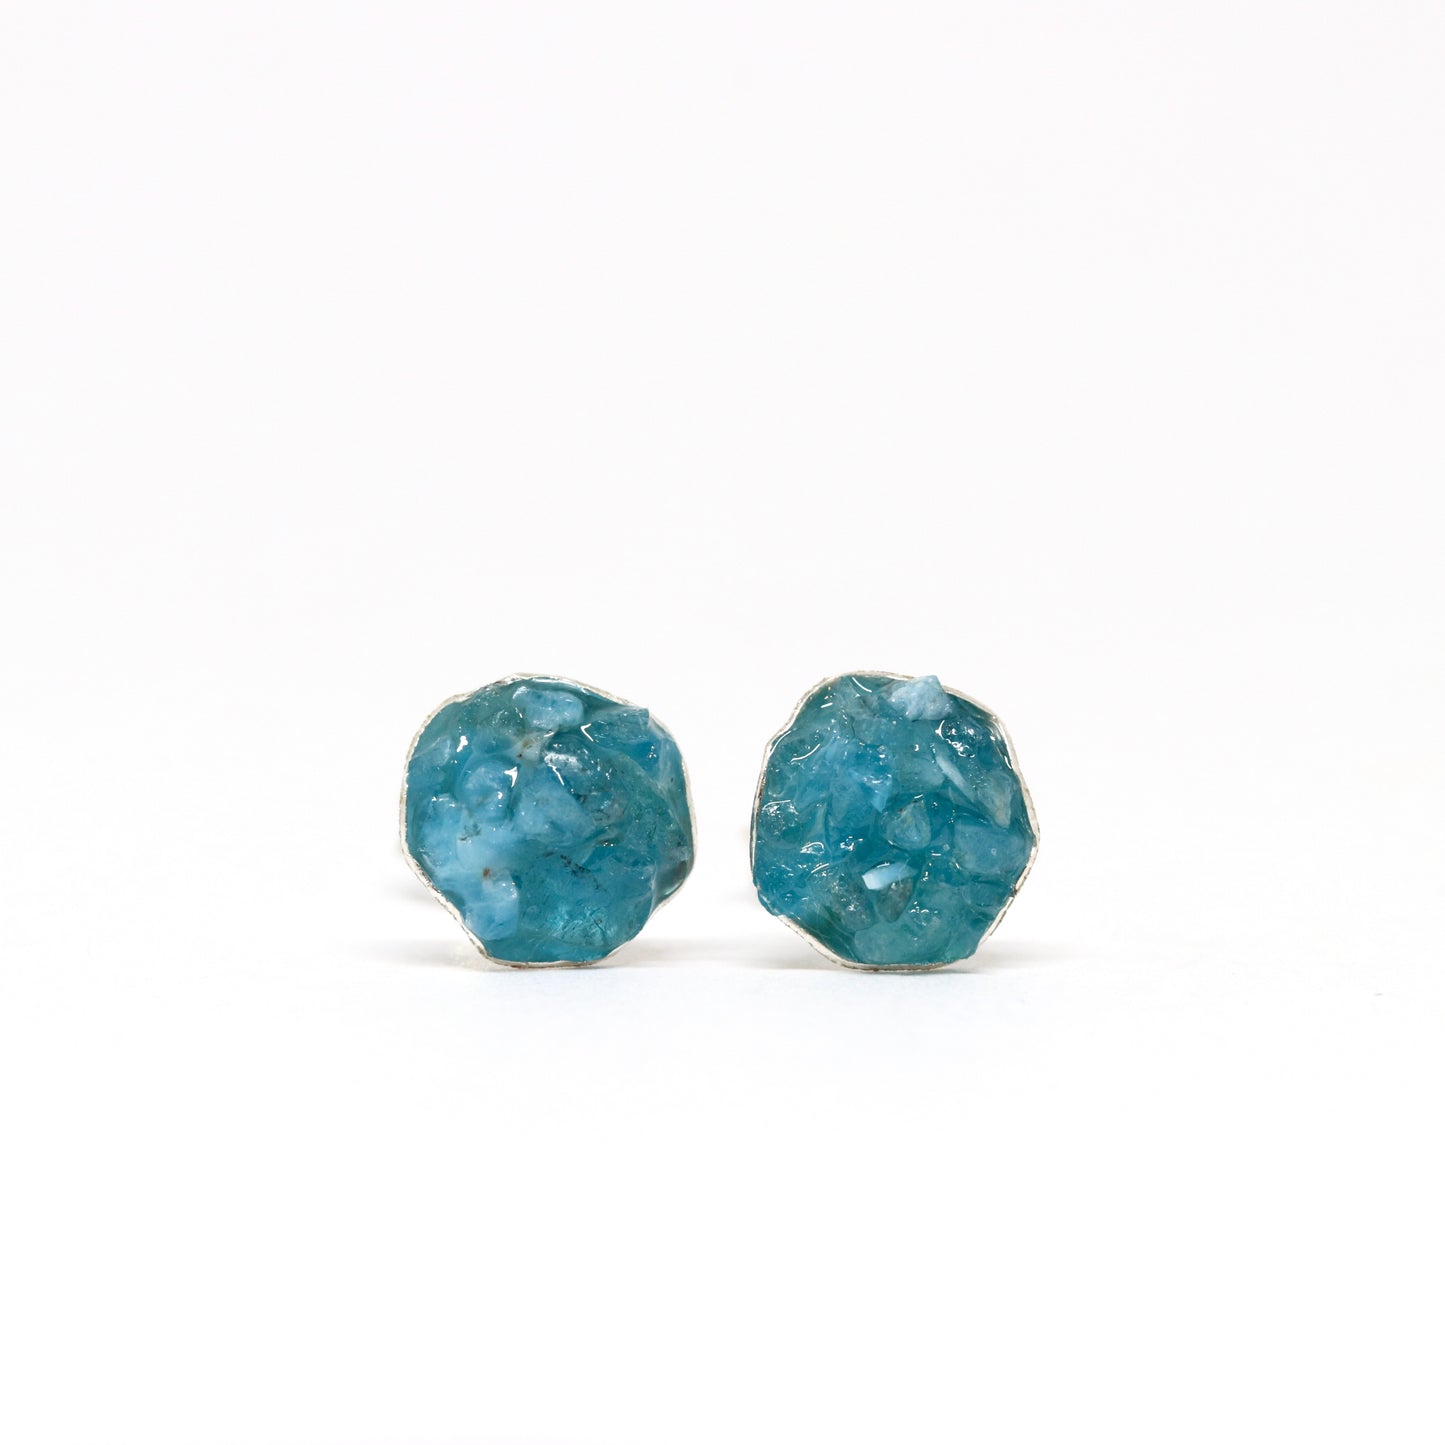 Apatite (dark). Gemstone and silver stud earrings. Made in Wanaka. Unique, colourful jewellery designed and crafted by New Zealand artist and jeweller Briar Hardy-Hesson.